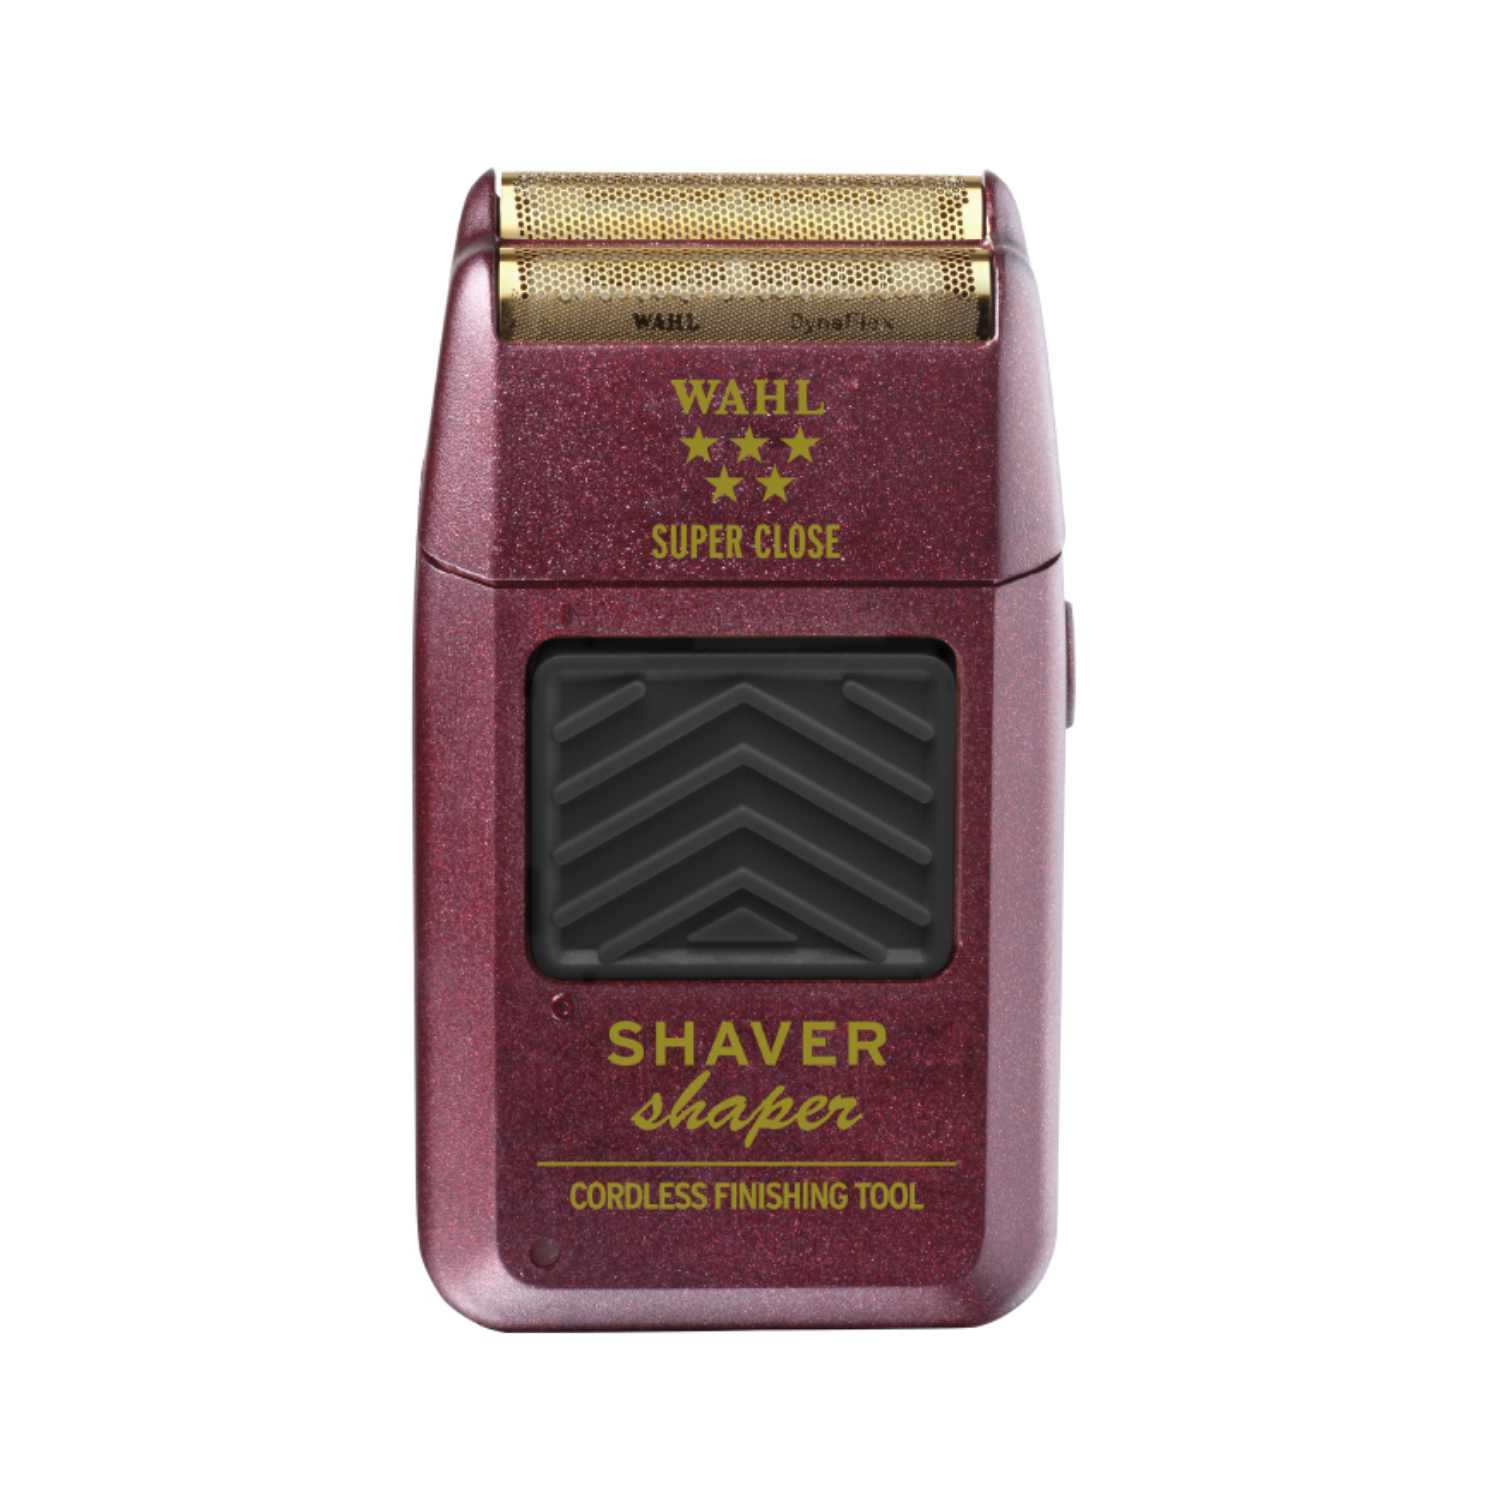 Wahl Professional 5-Star Rechargeable Shaver Shaper #55602